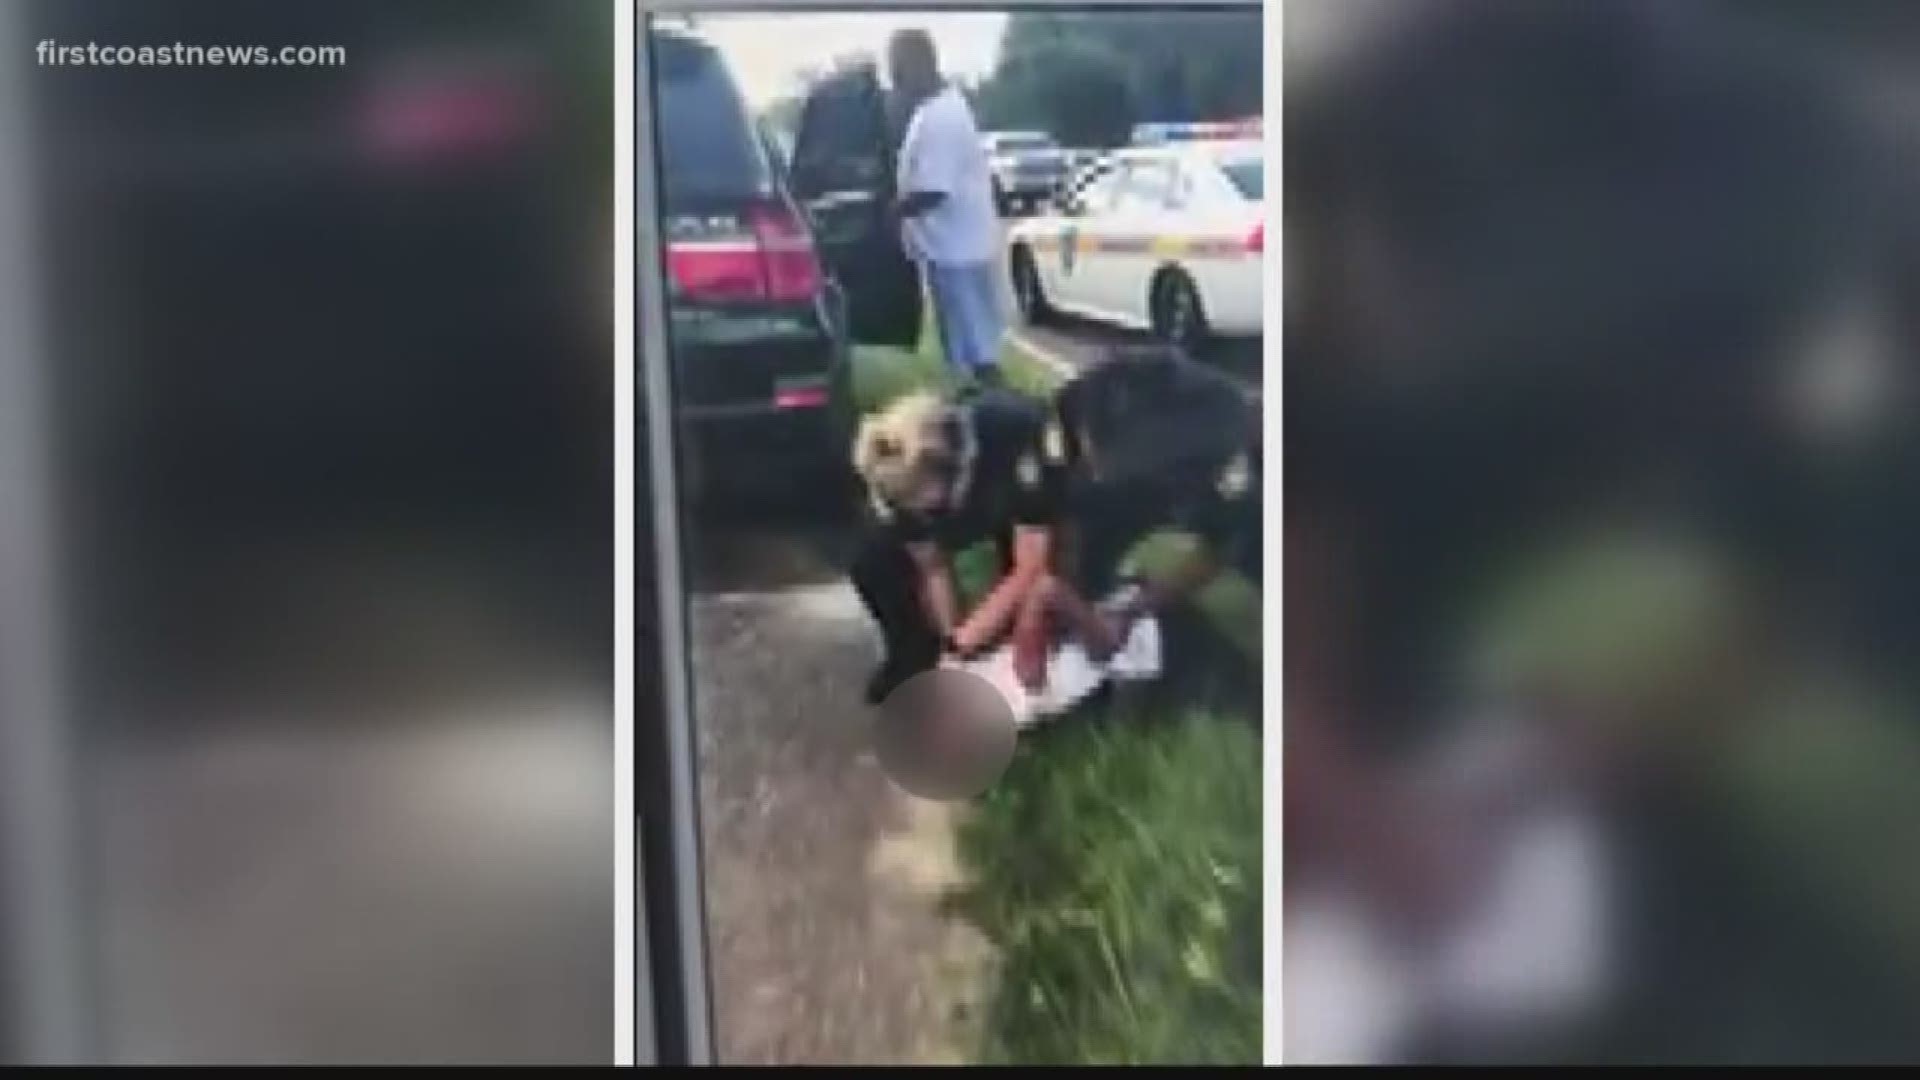 A video of JSO officers aggressively detaining children is going viral, with more than 43,000 shares within 24 hours. In response, there has been a complaint filed regarding the incident.